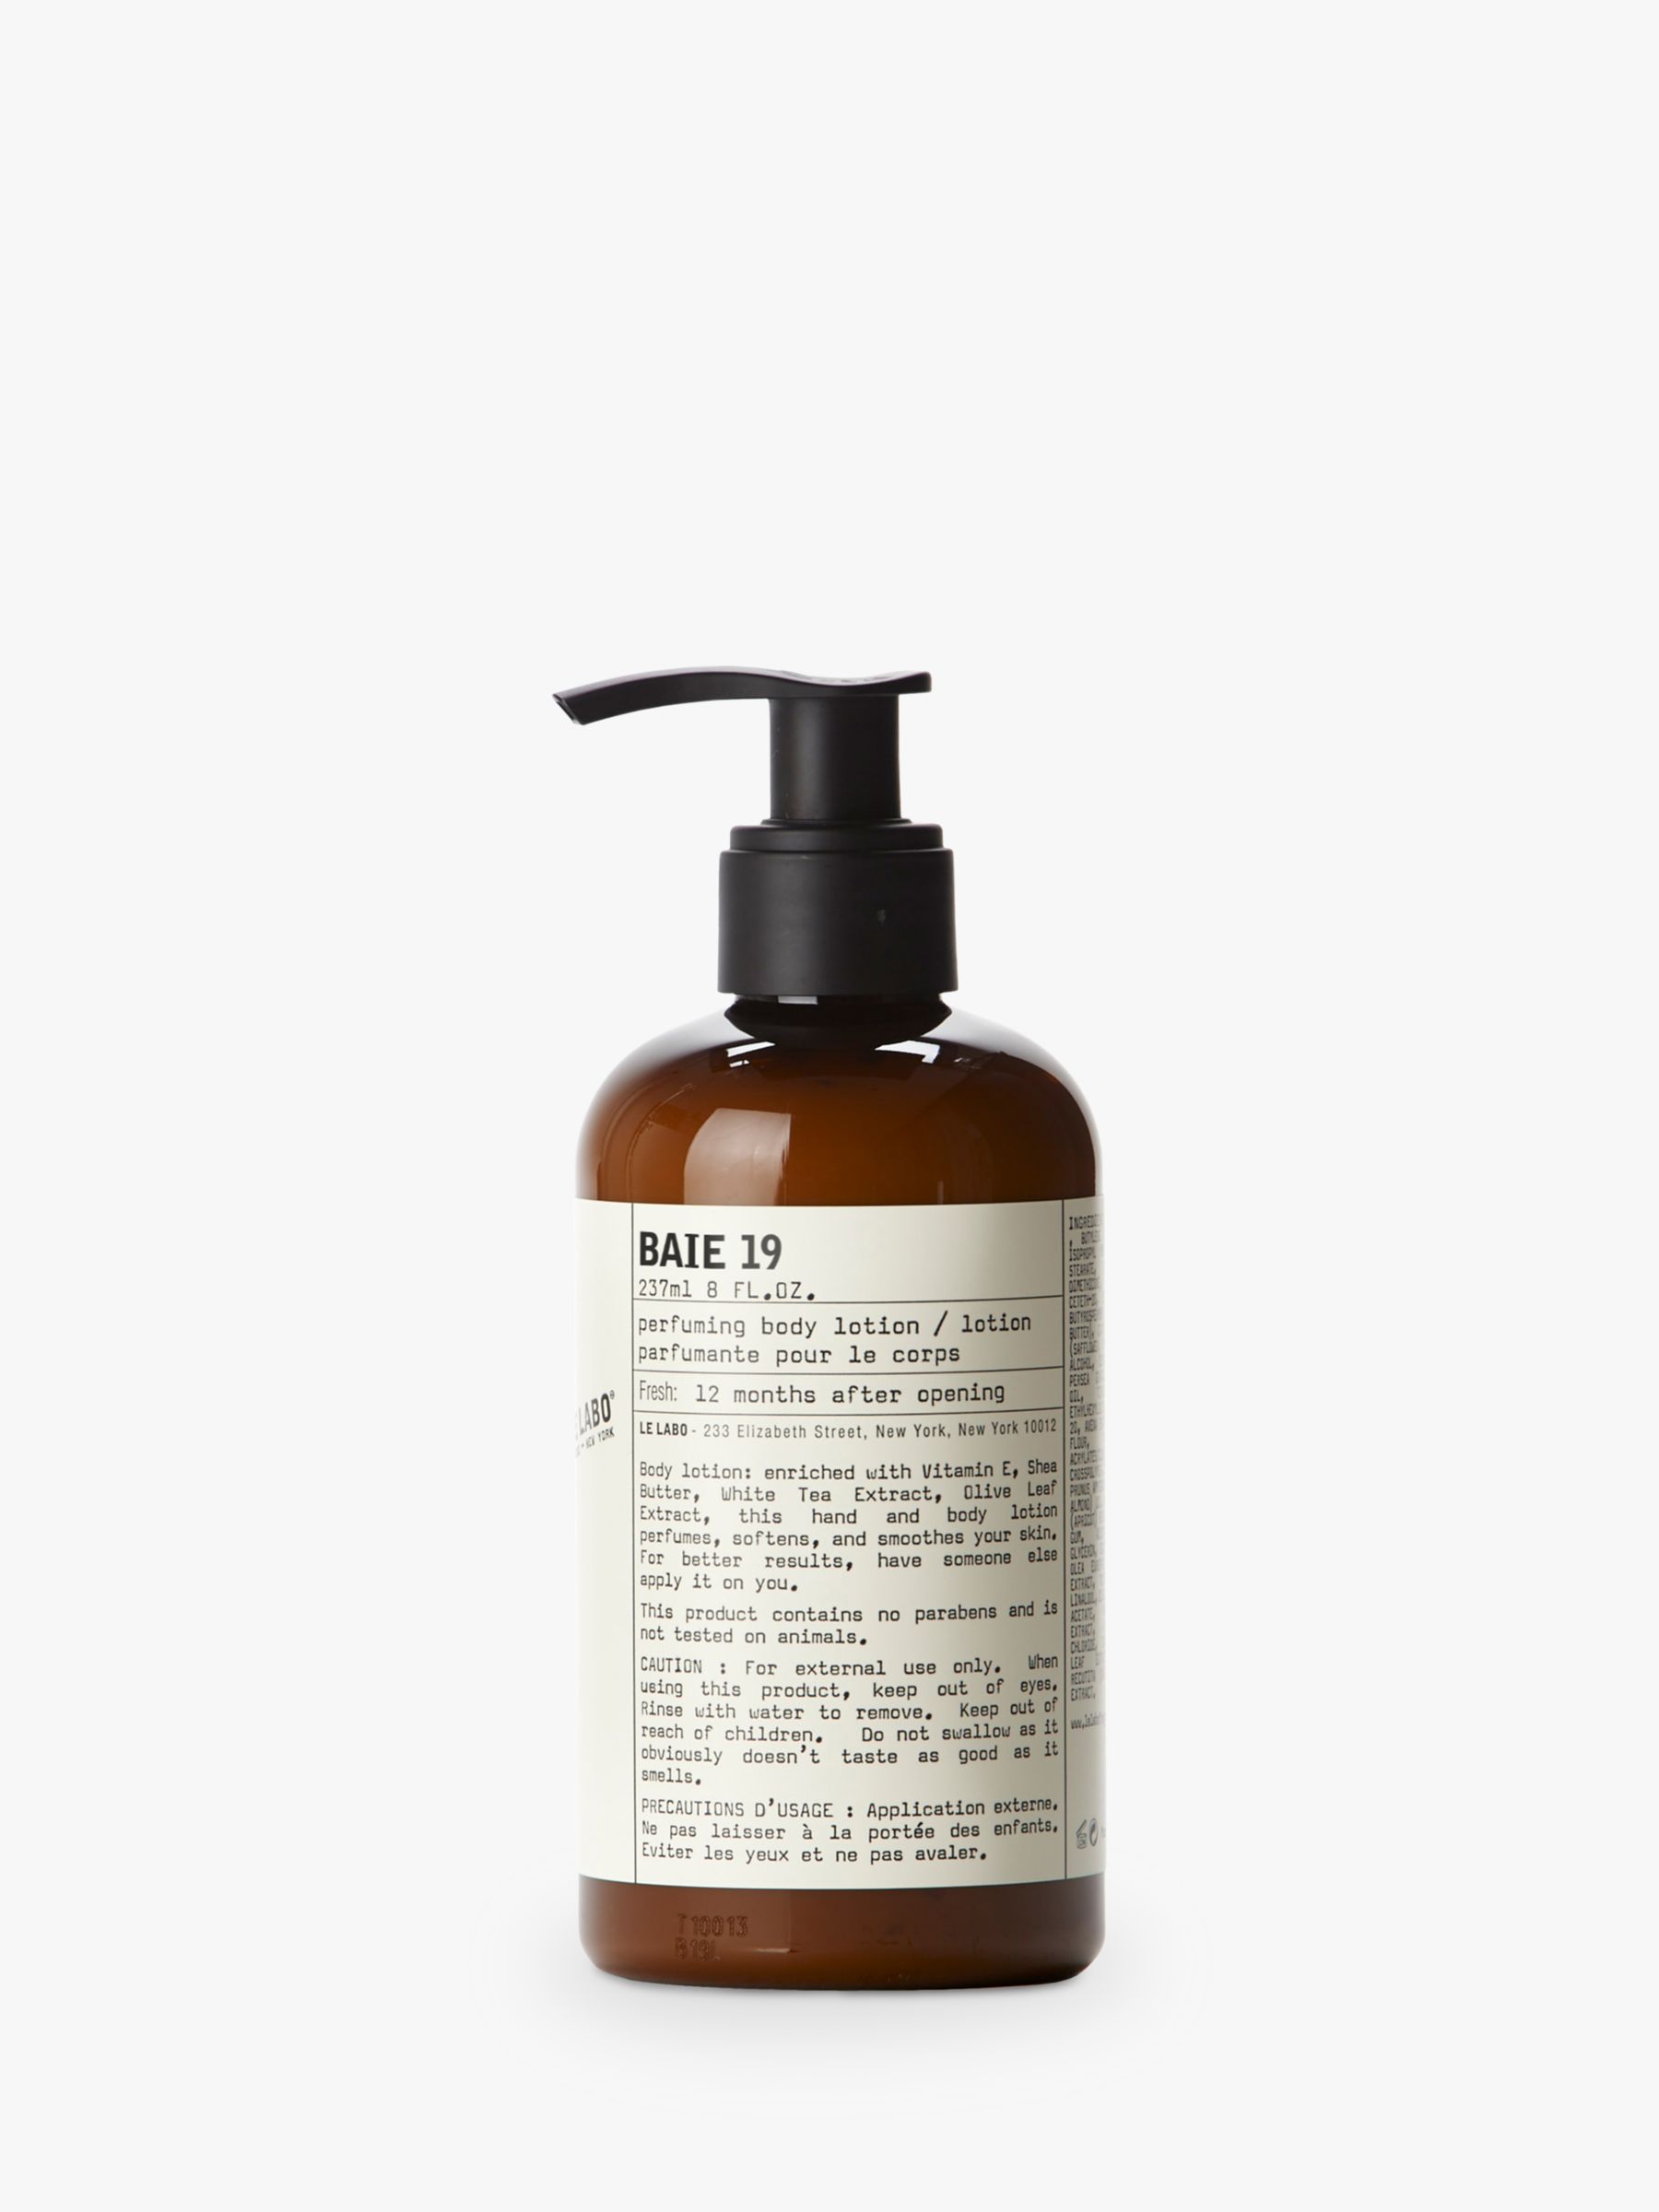 Le Labo Baie 19 Perfuming Body Lotion, 237ml 1